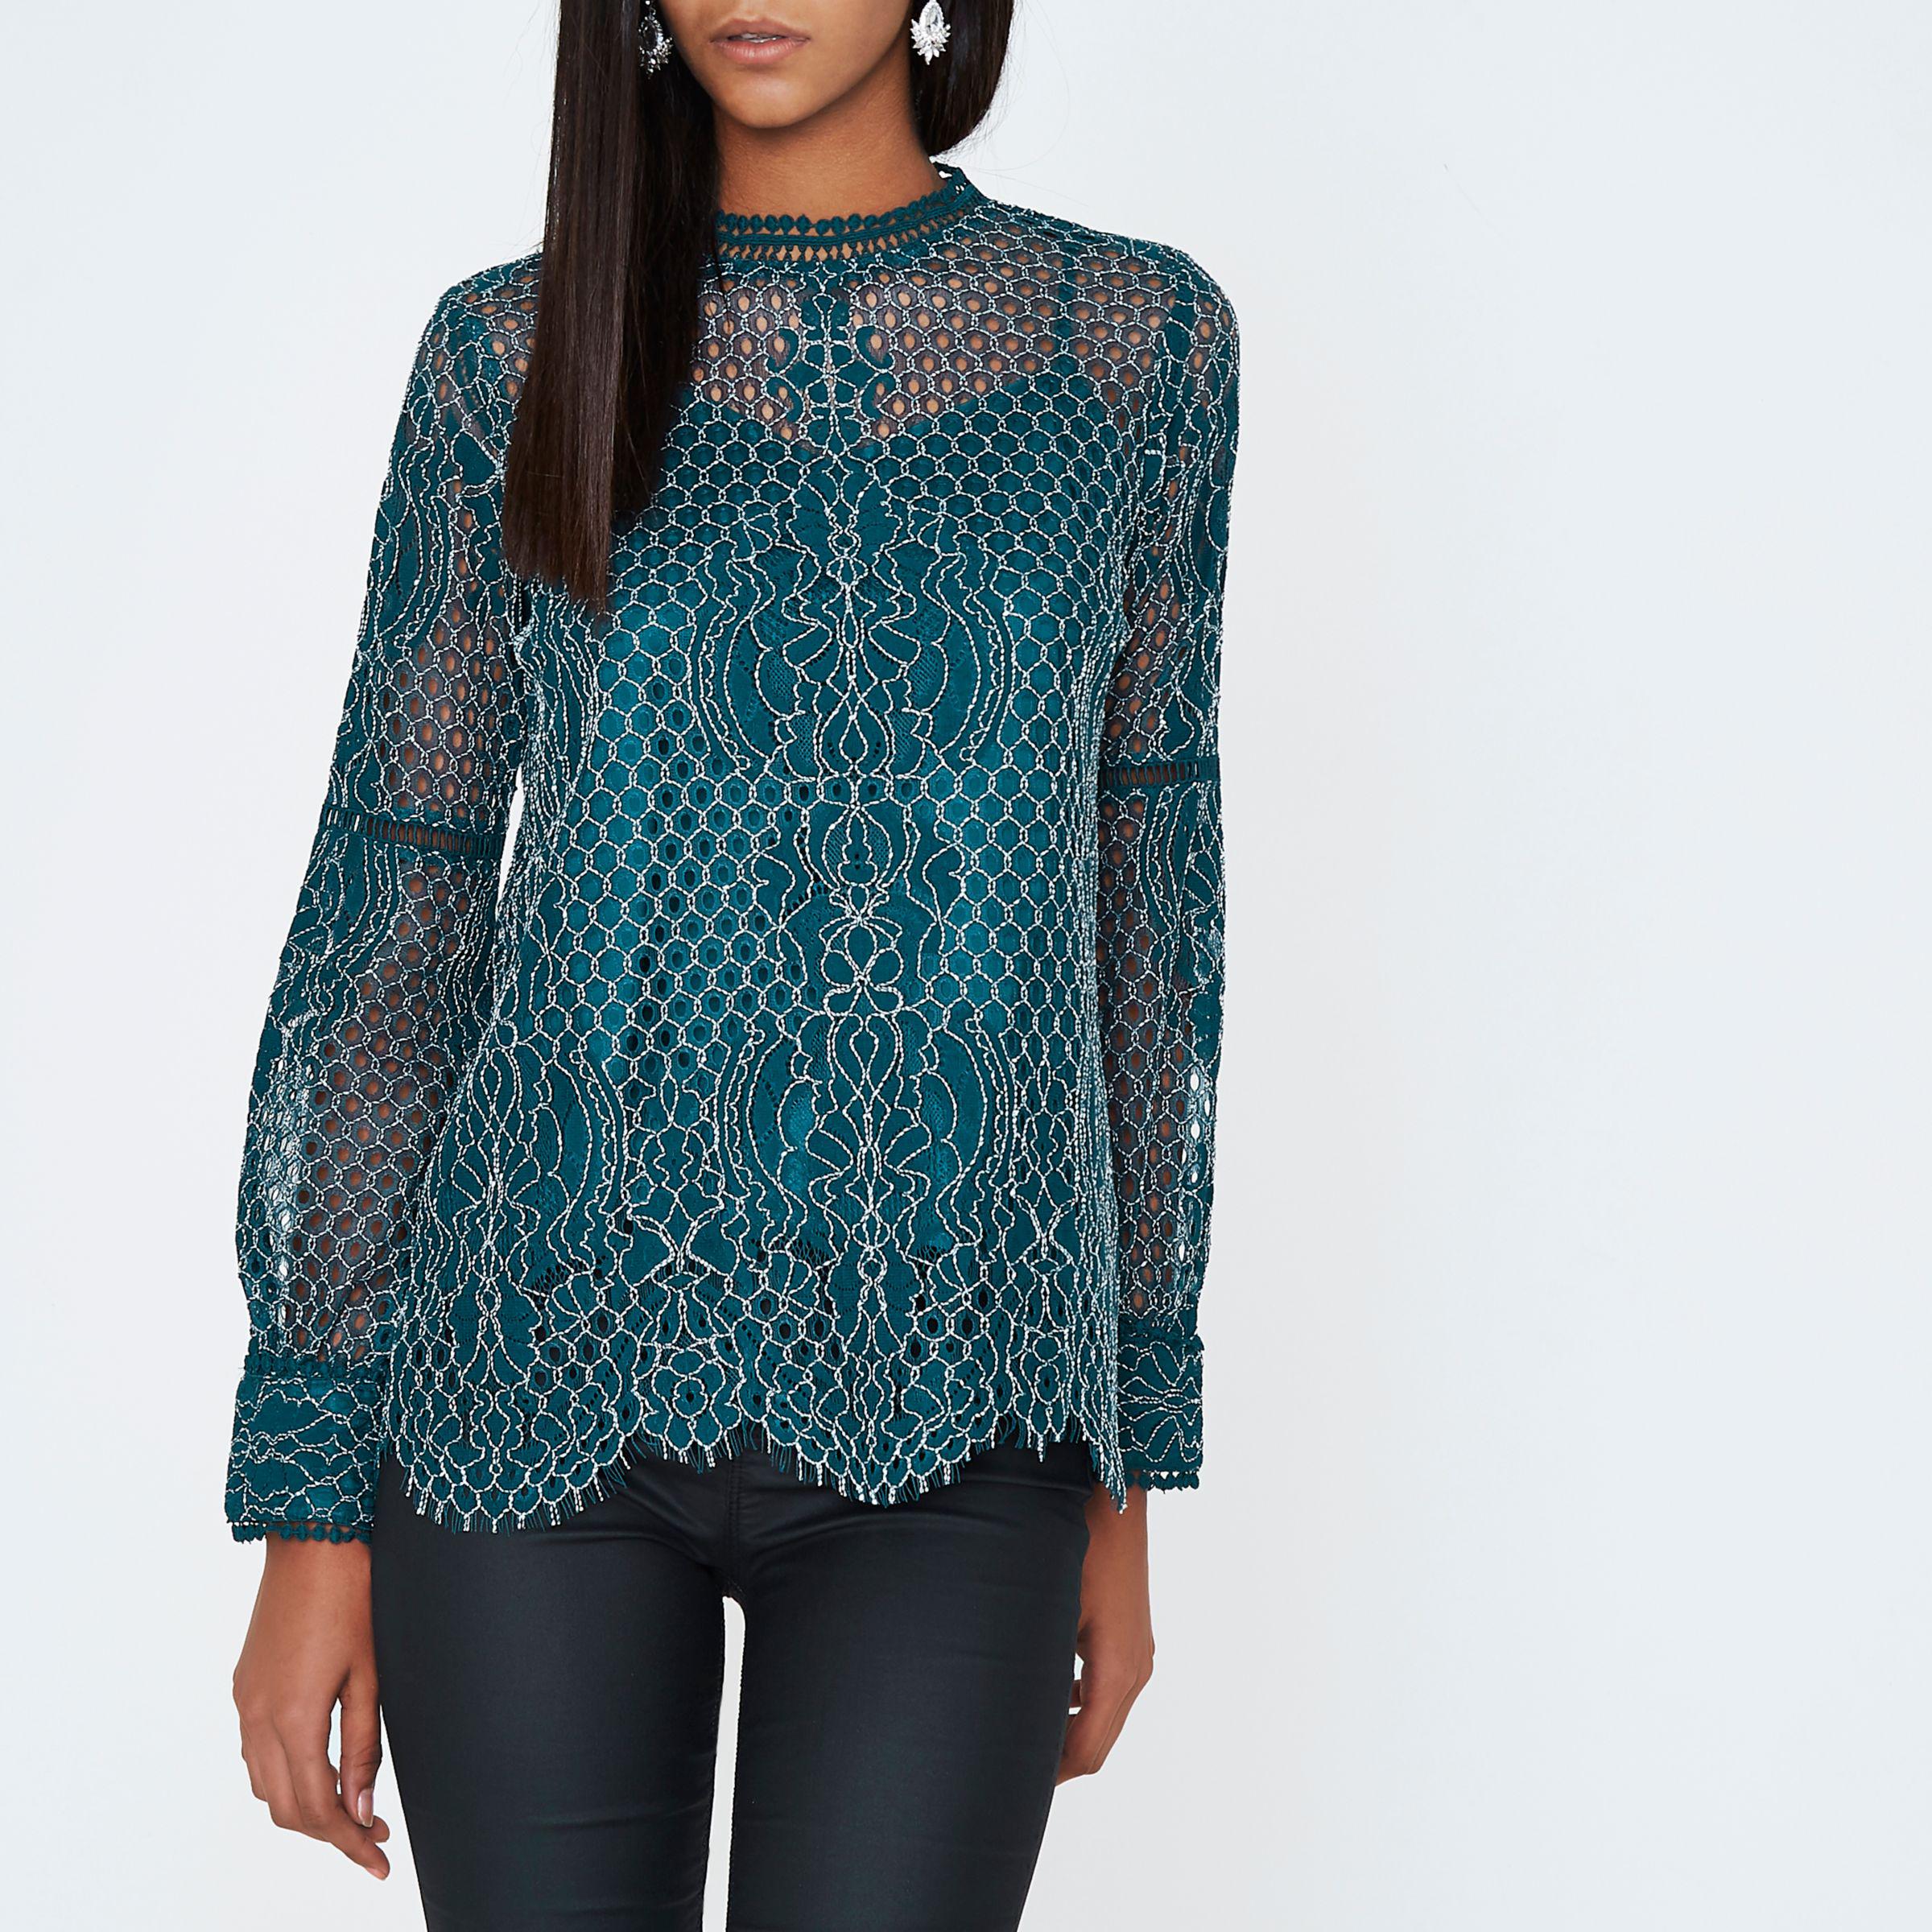 River Island Dark Green Lace High Neck Long Sleeve Top - Lyst